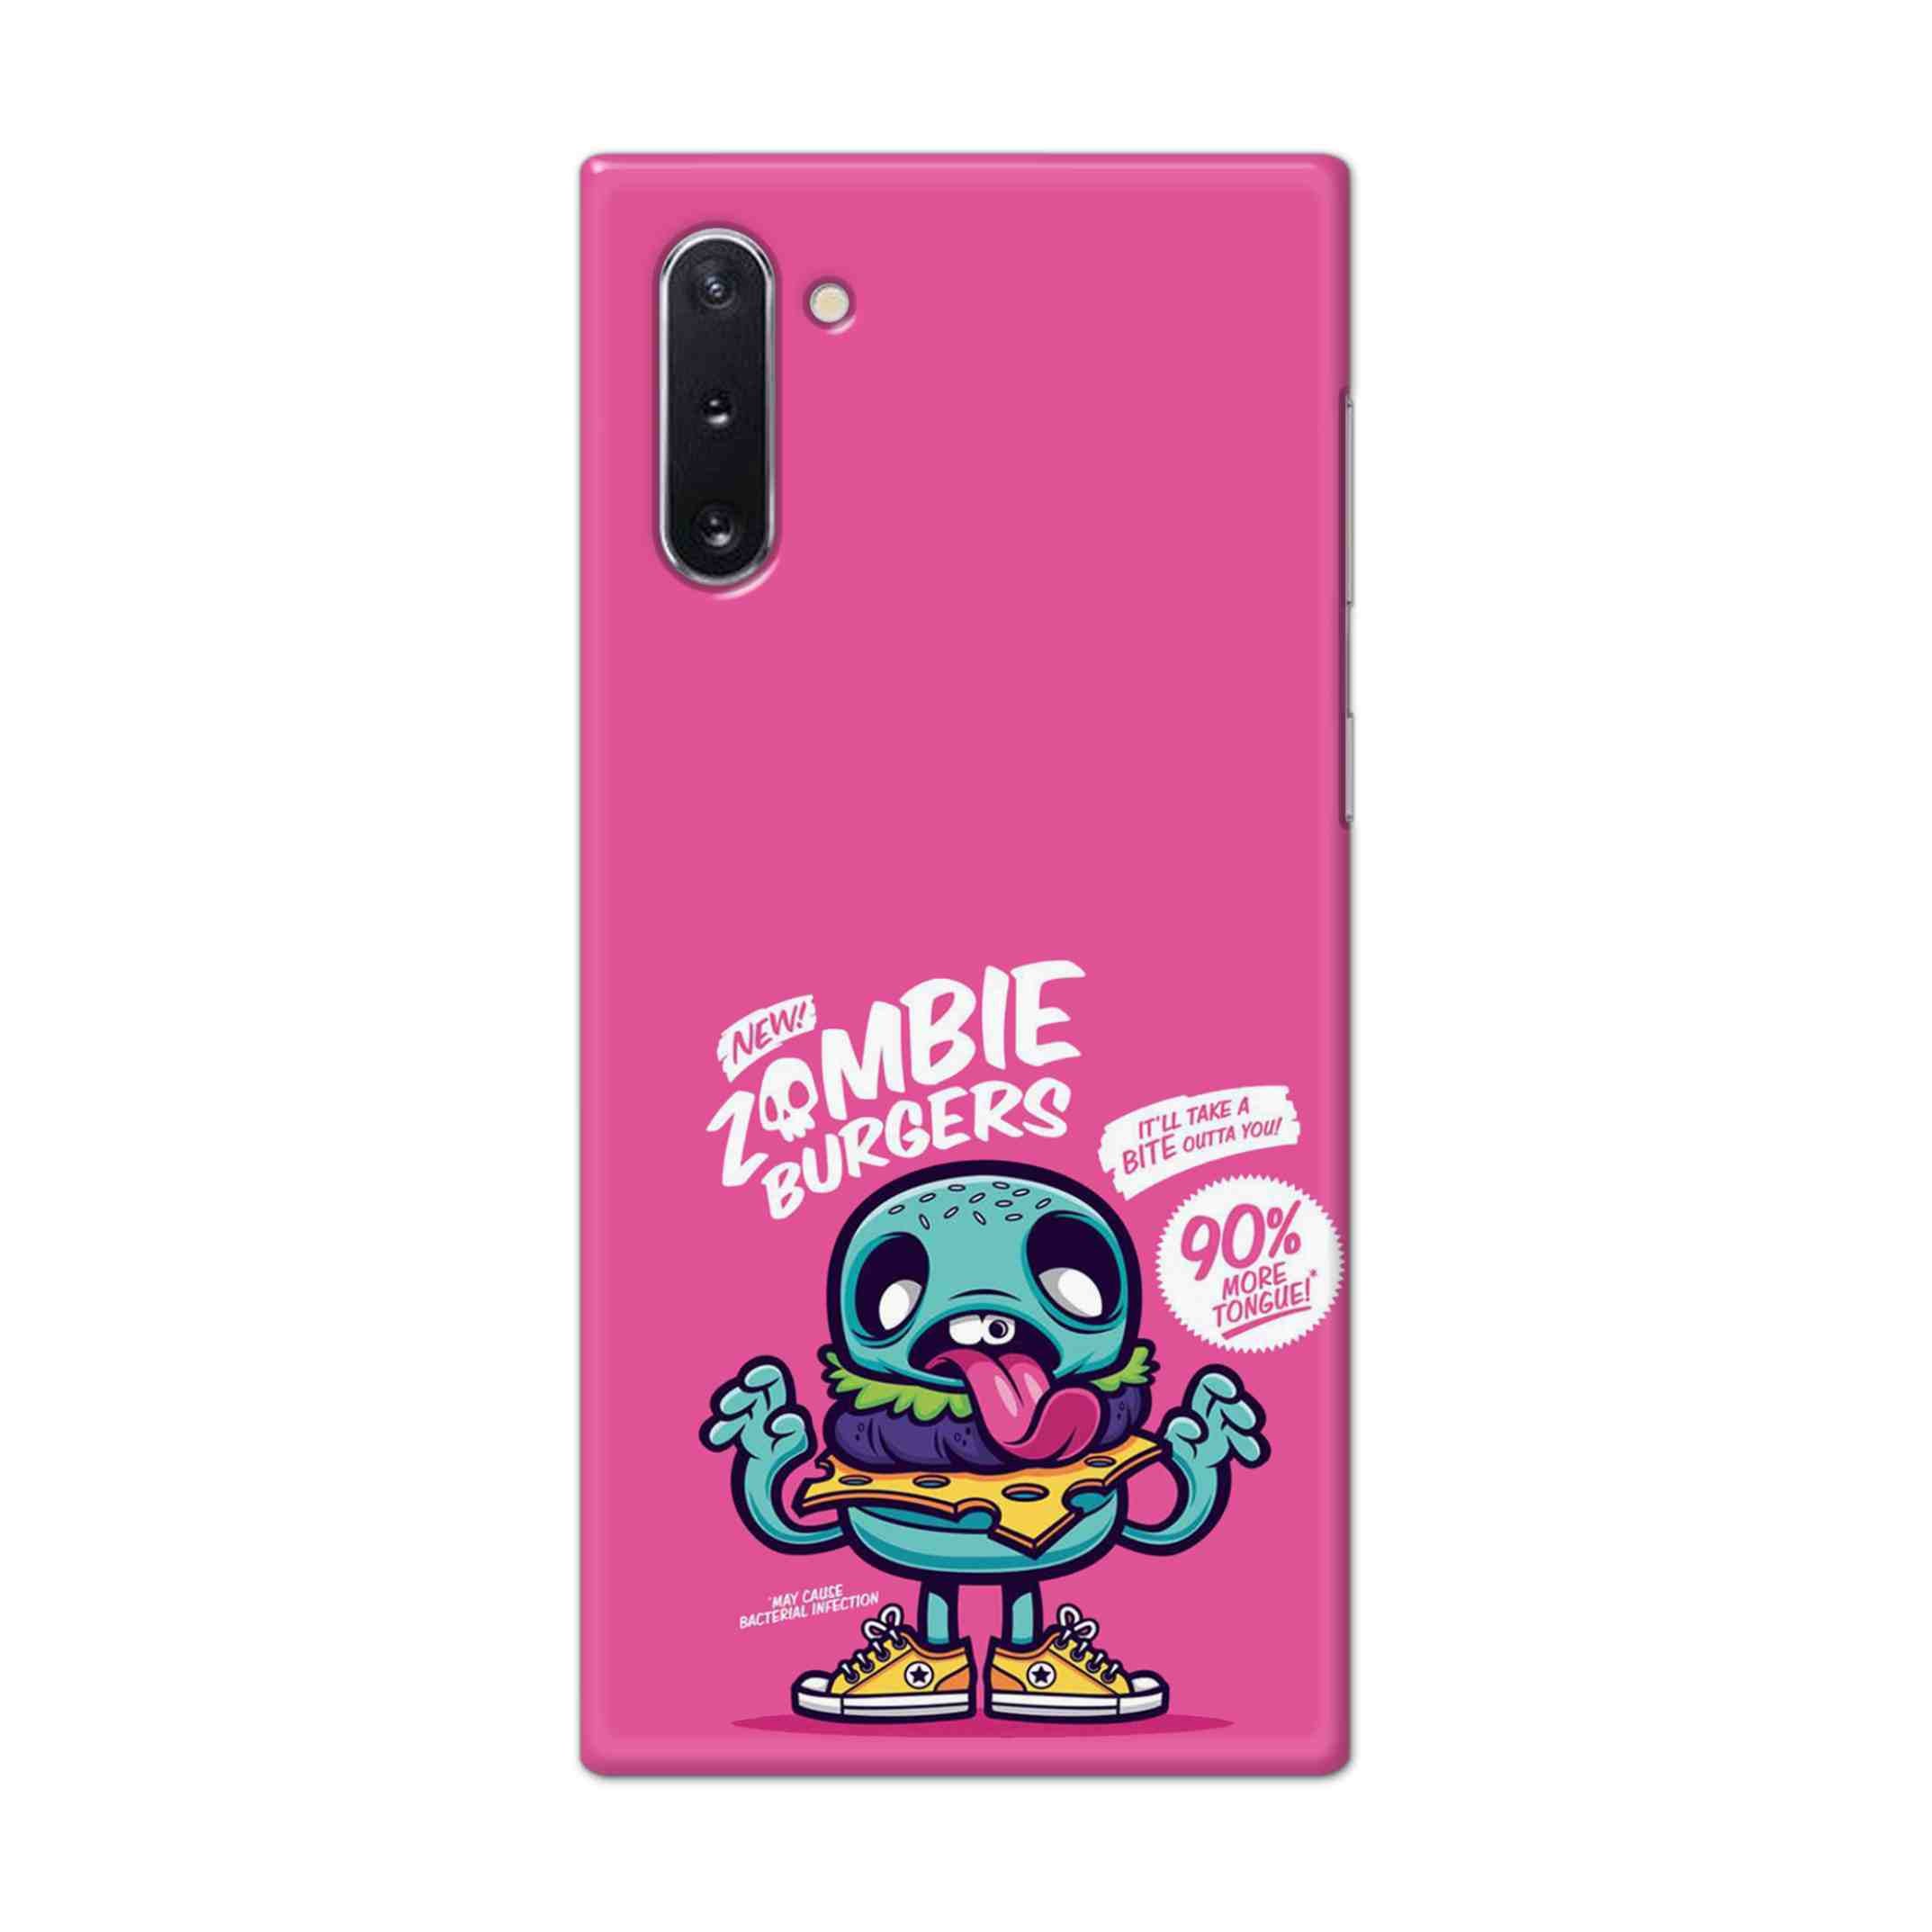 Buy New Zombie Burgers Hard Back Mobile Phone Case Cover For Samsung Galaxy Note 10 Online